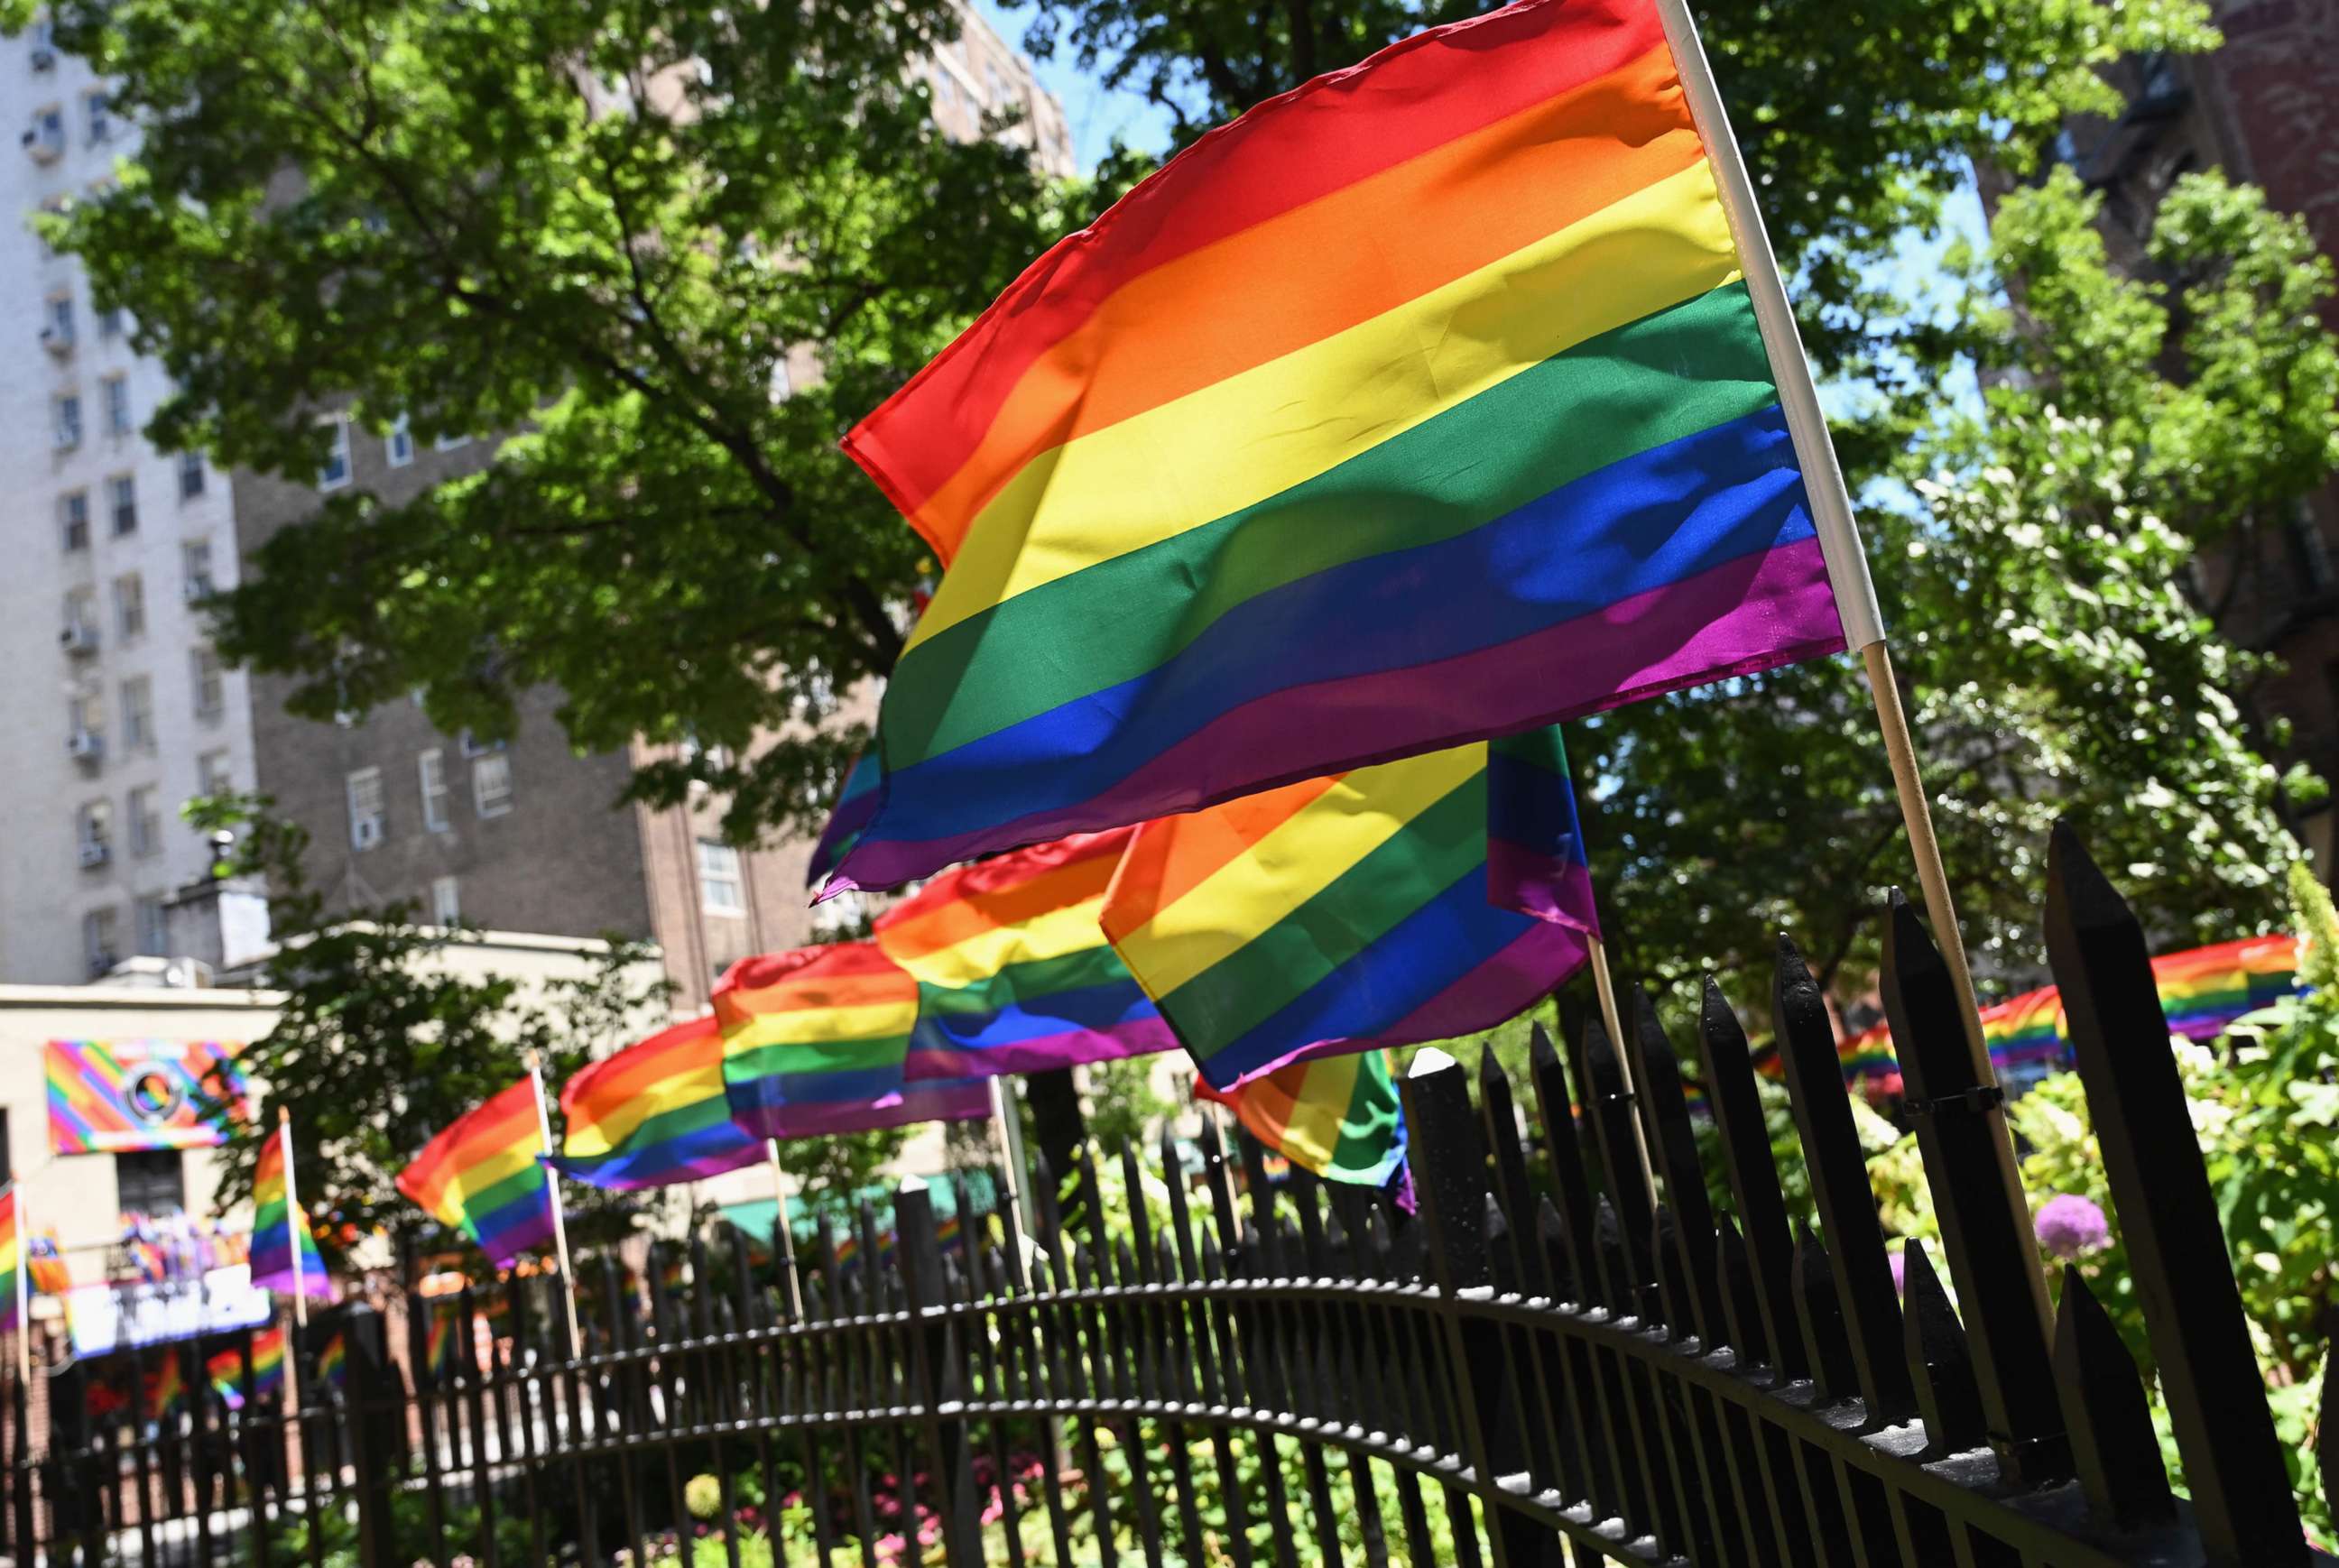 PHOTO: In this photo taken on June 4, 2019, rainbow flags are seen at the Stonewall National Monument in New York.